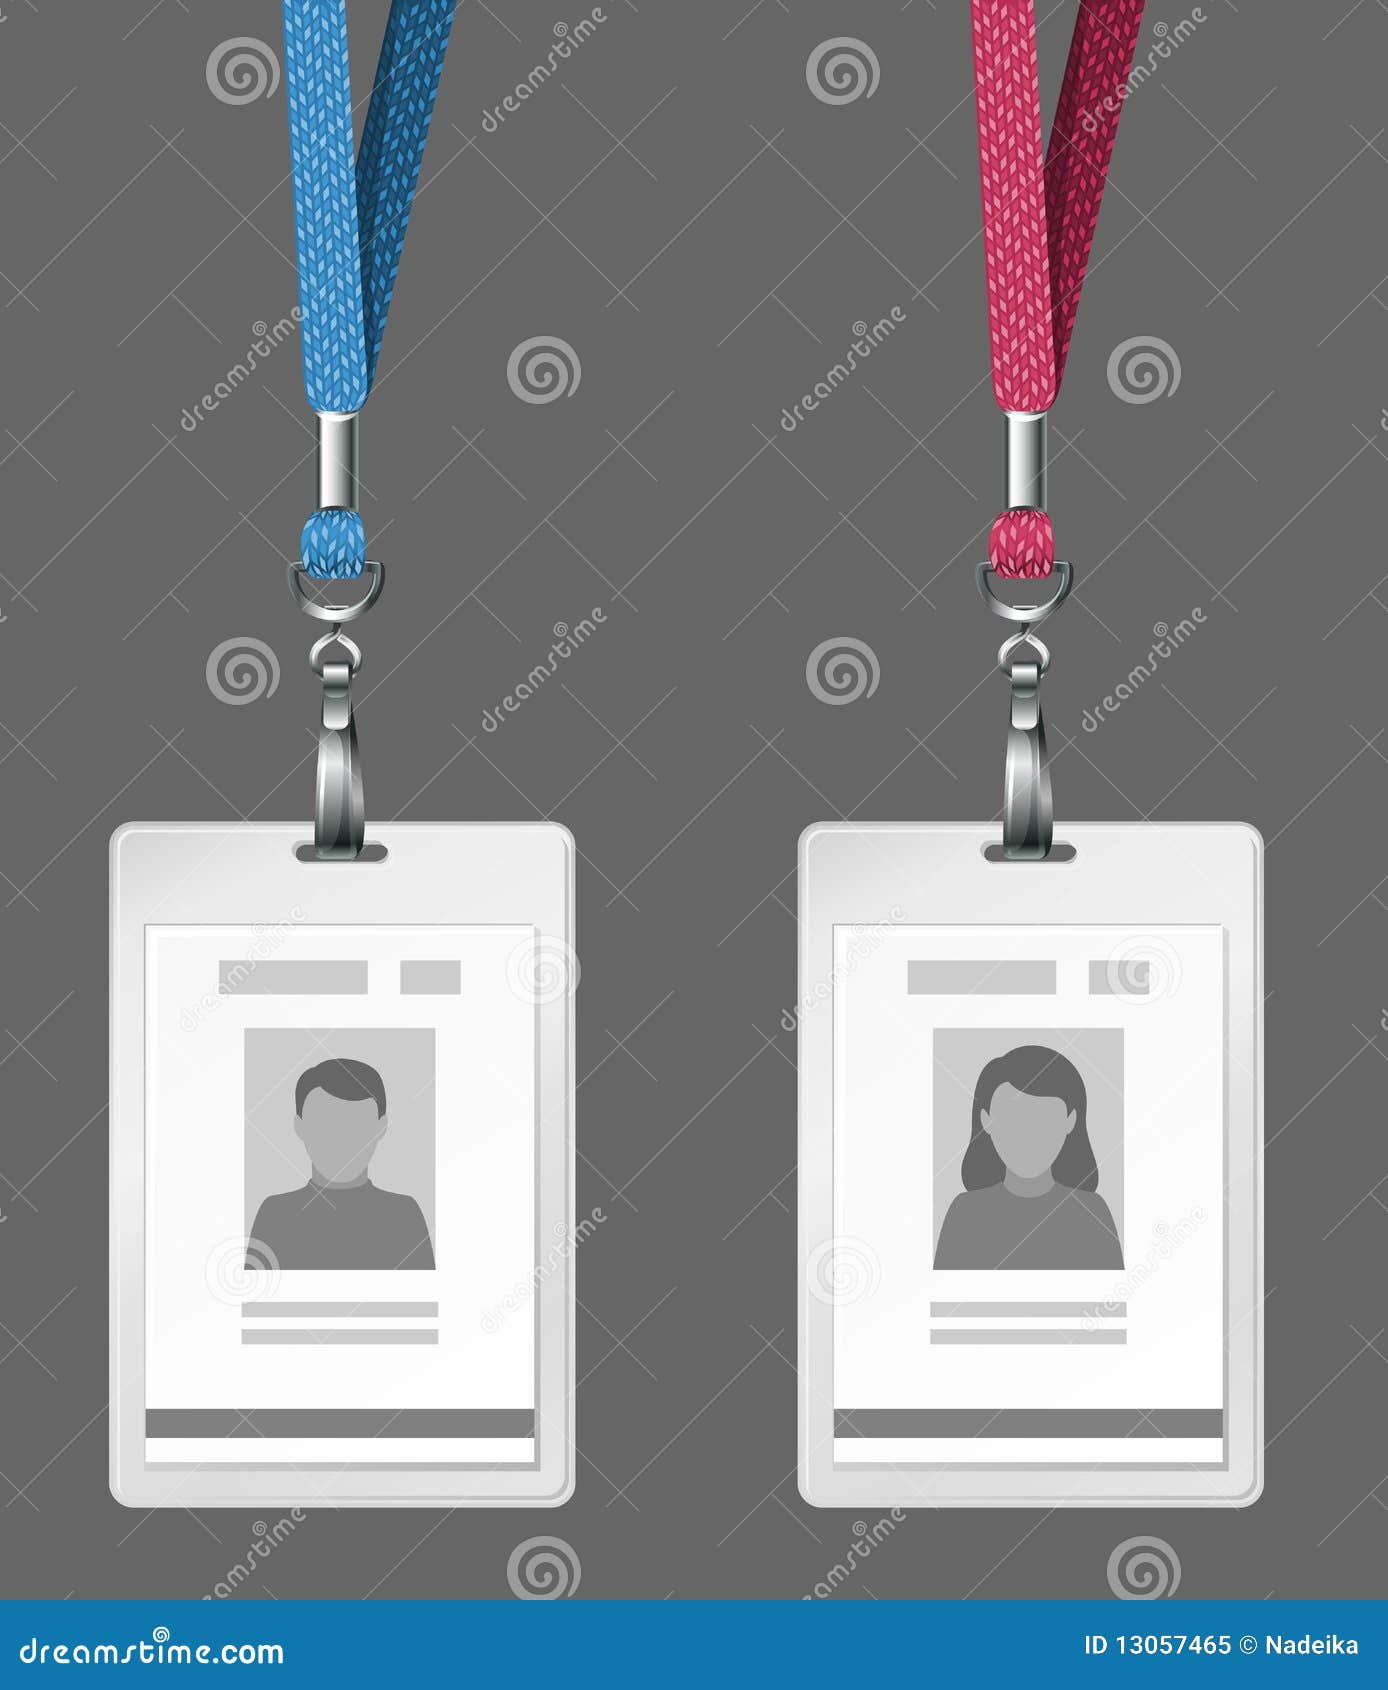 identification cards template